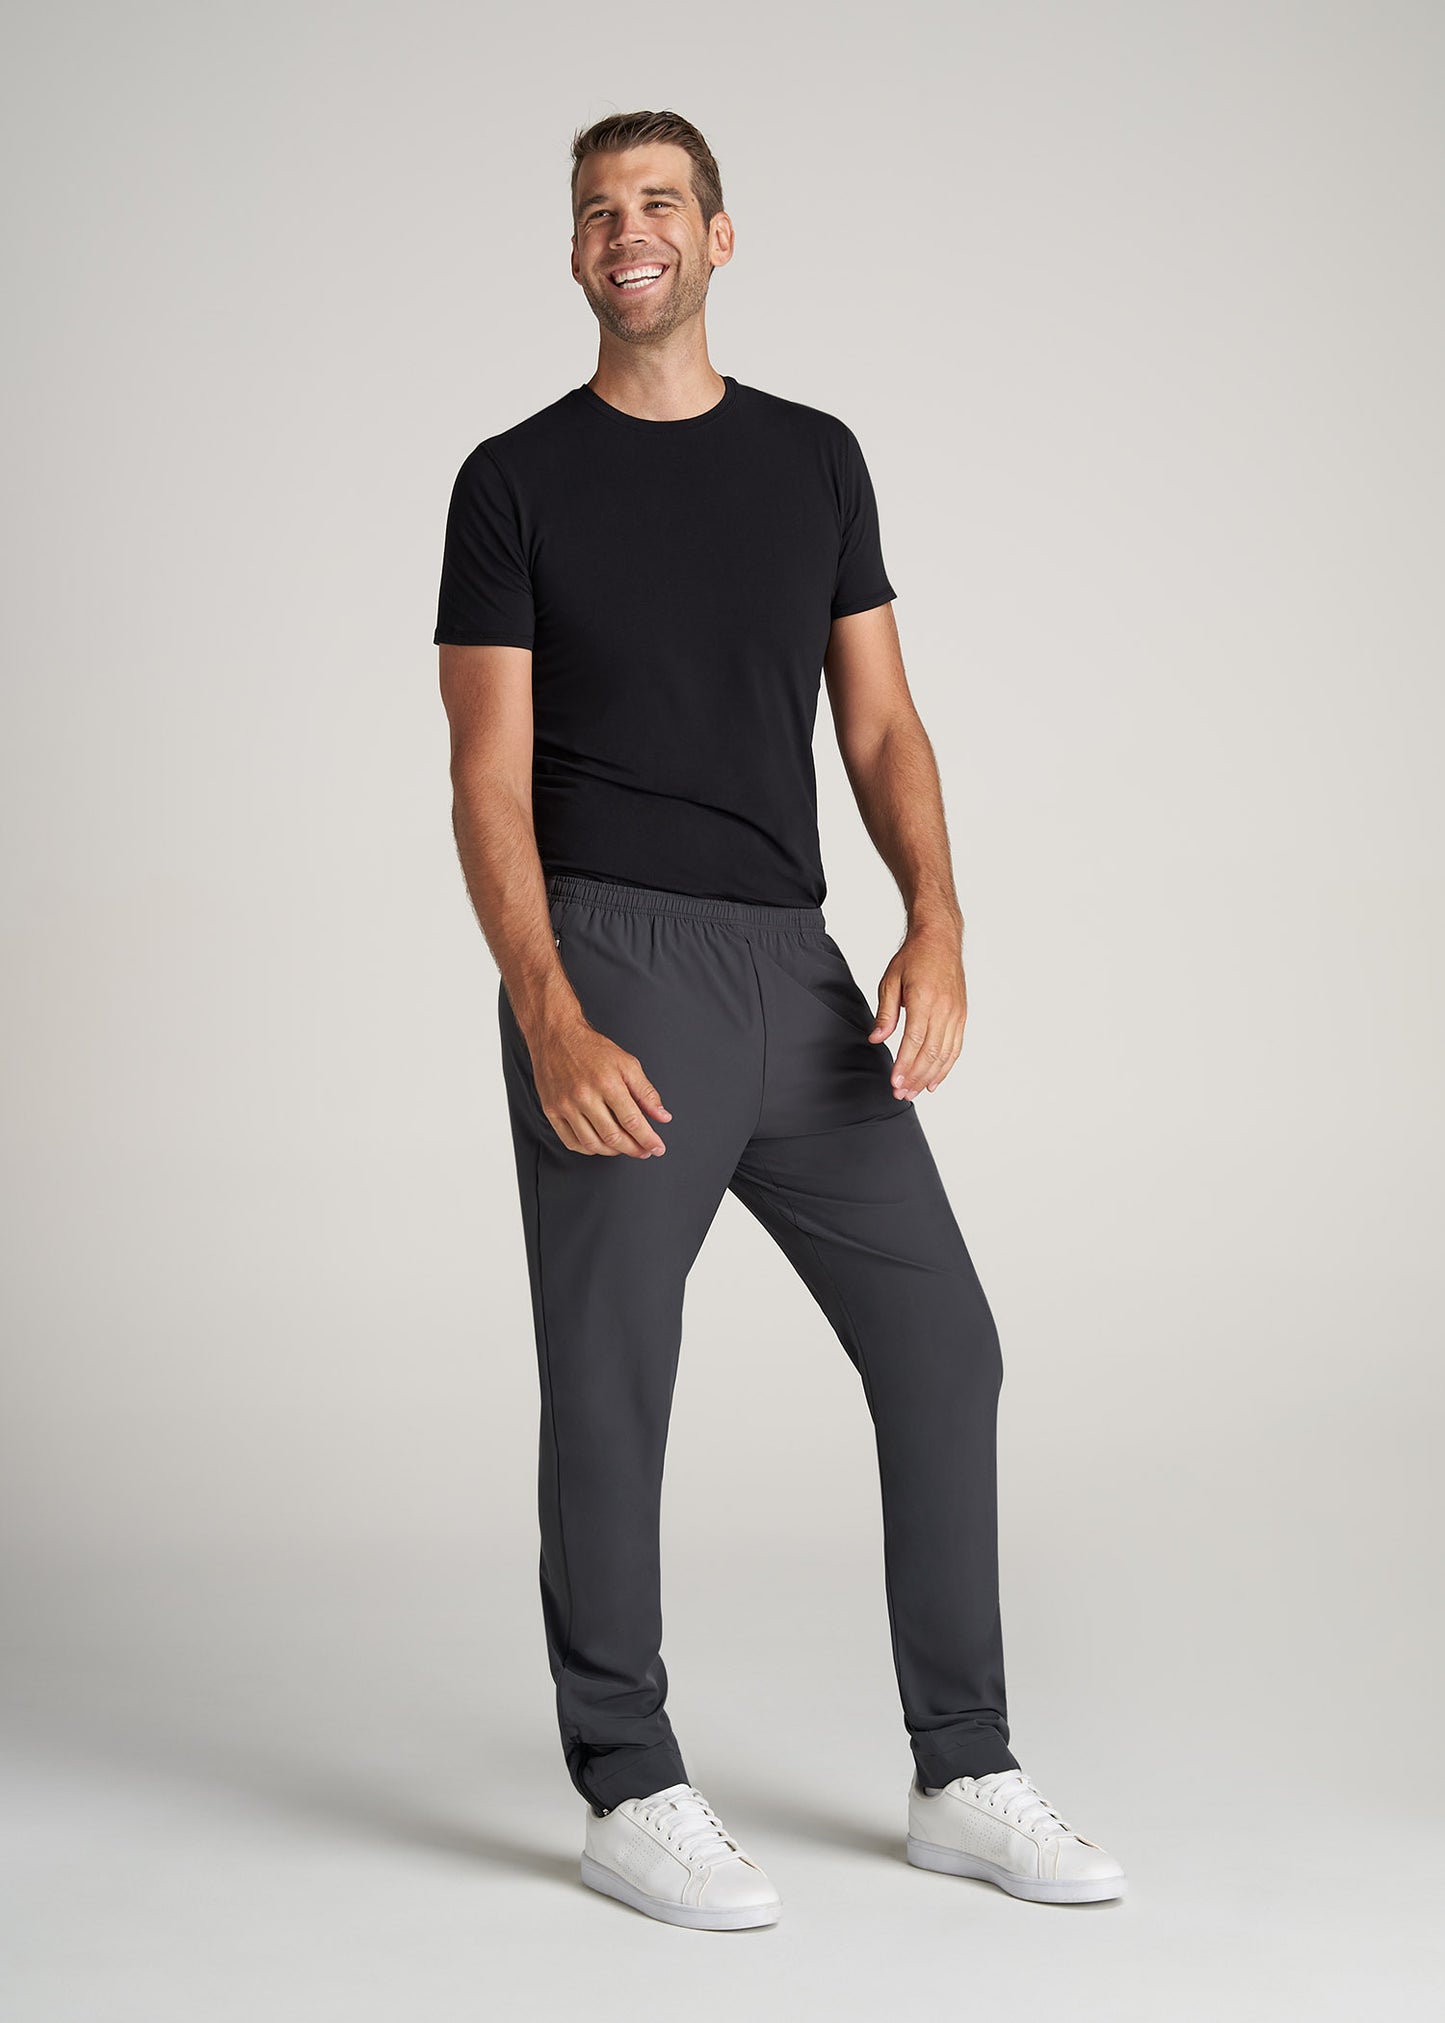 American-Tall-Men-TaperedFit-LightWeight-AthleticPant-Charcoal-full